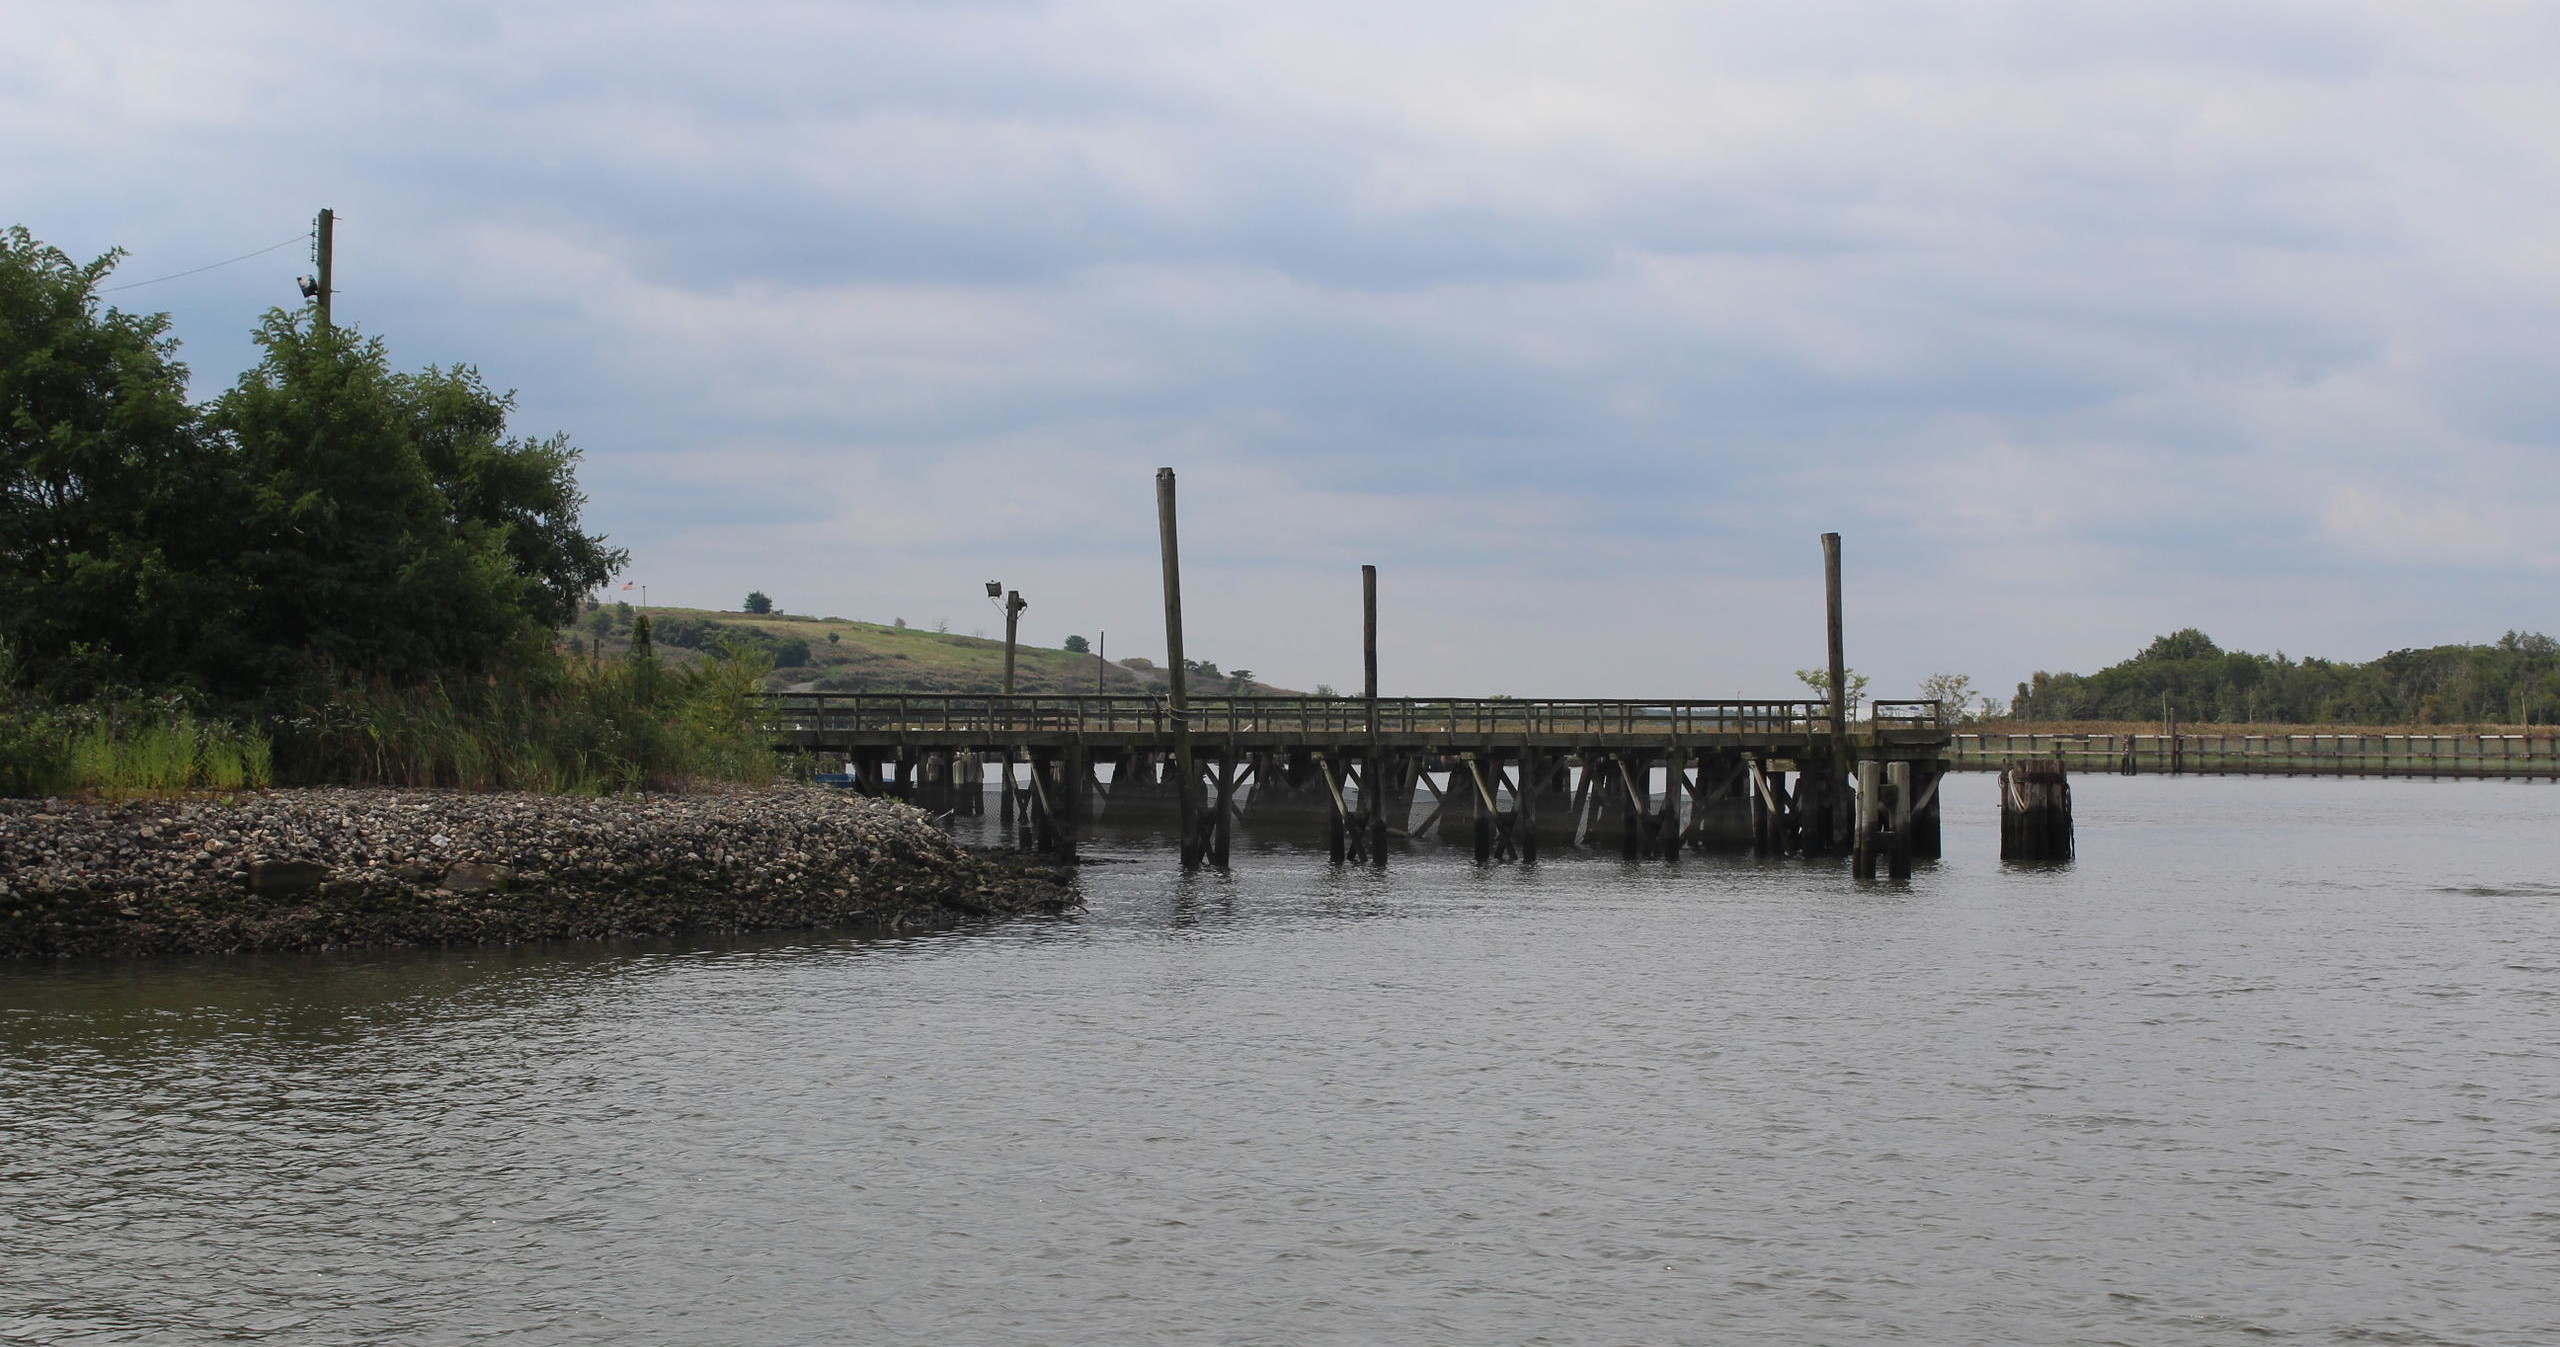 AIANY Industrial Waterway Tour to Freshkills Park